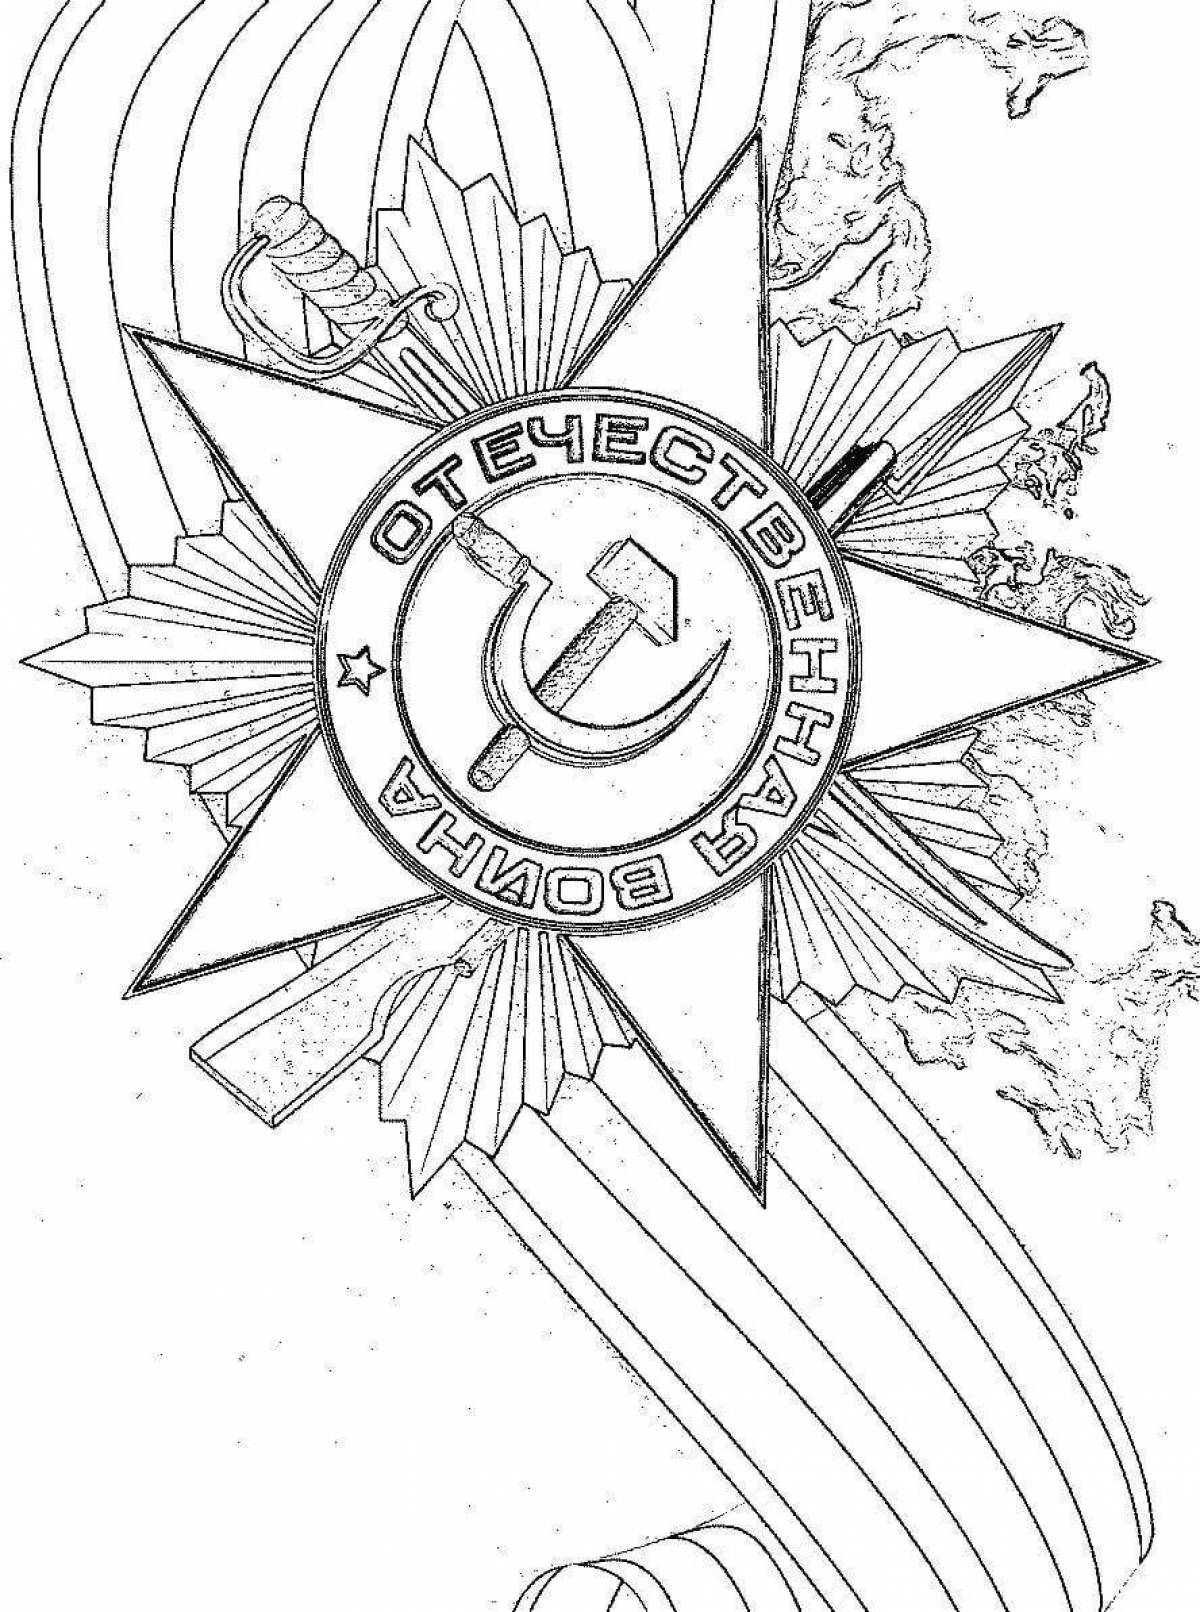 Coloring page splendid order of victory